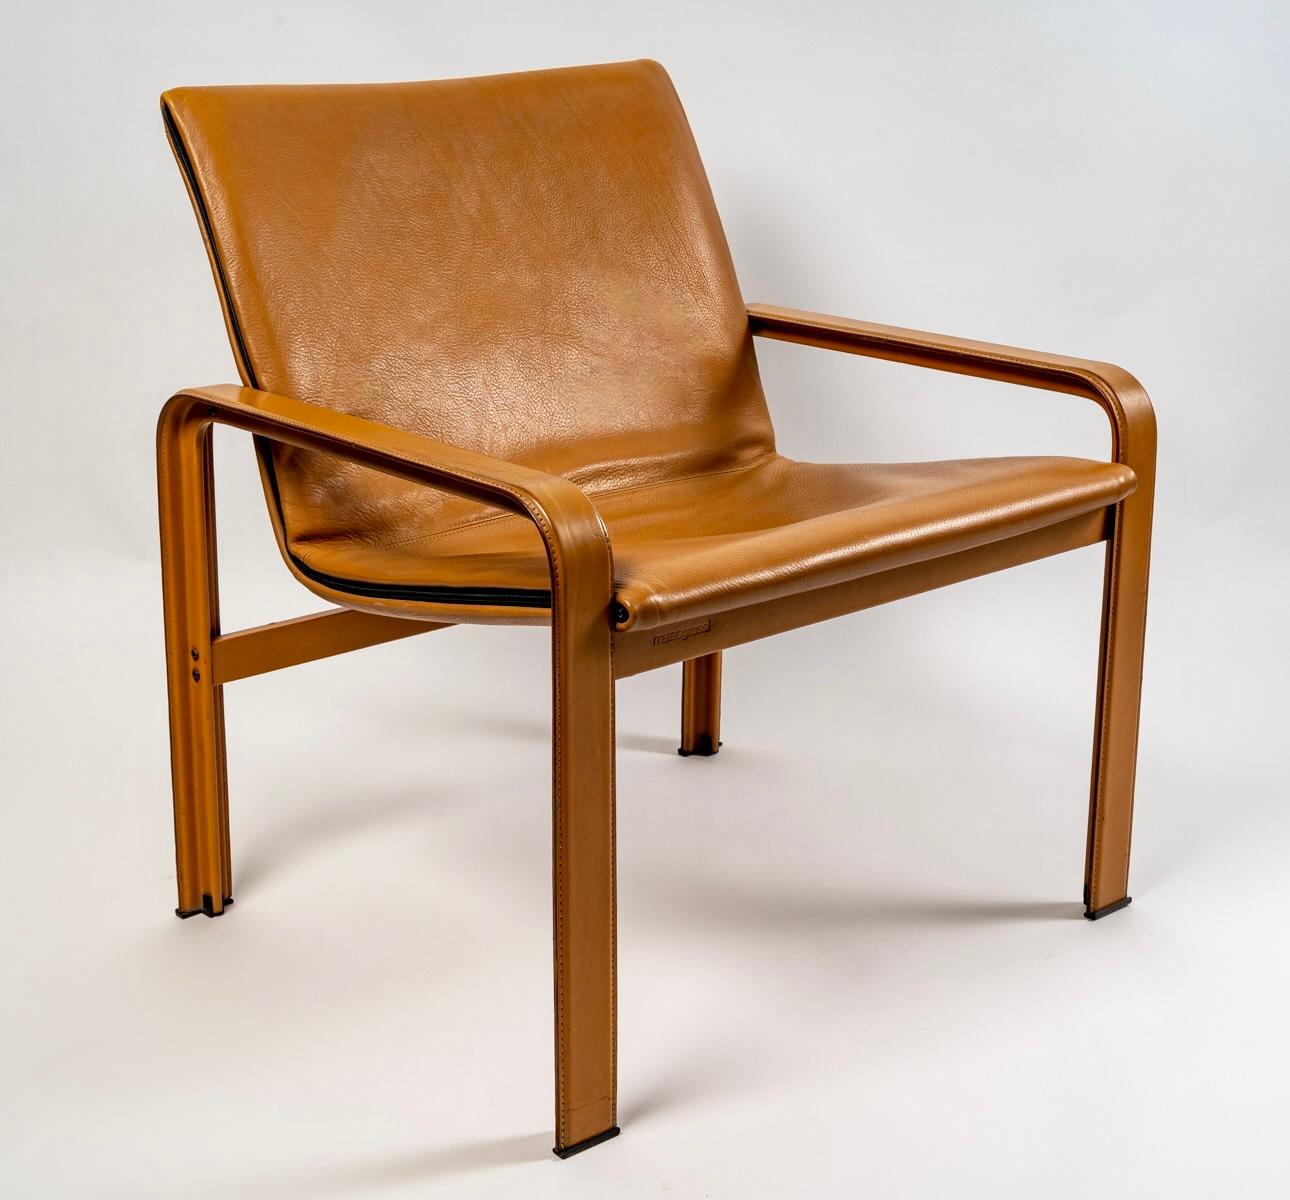 1970 Pair of Armchairs Jacques Toussaint & Patrizia Angeloni for Matteo Grassi For Sale 2